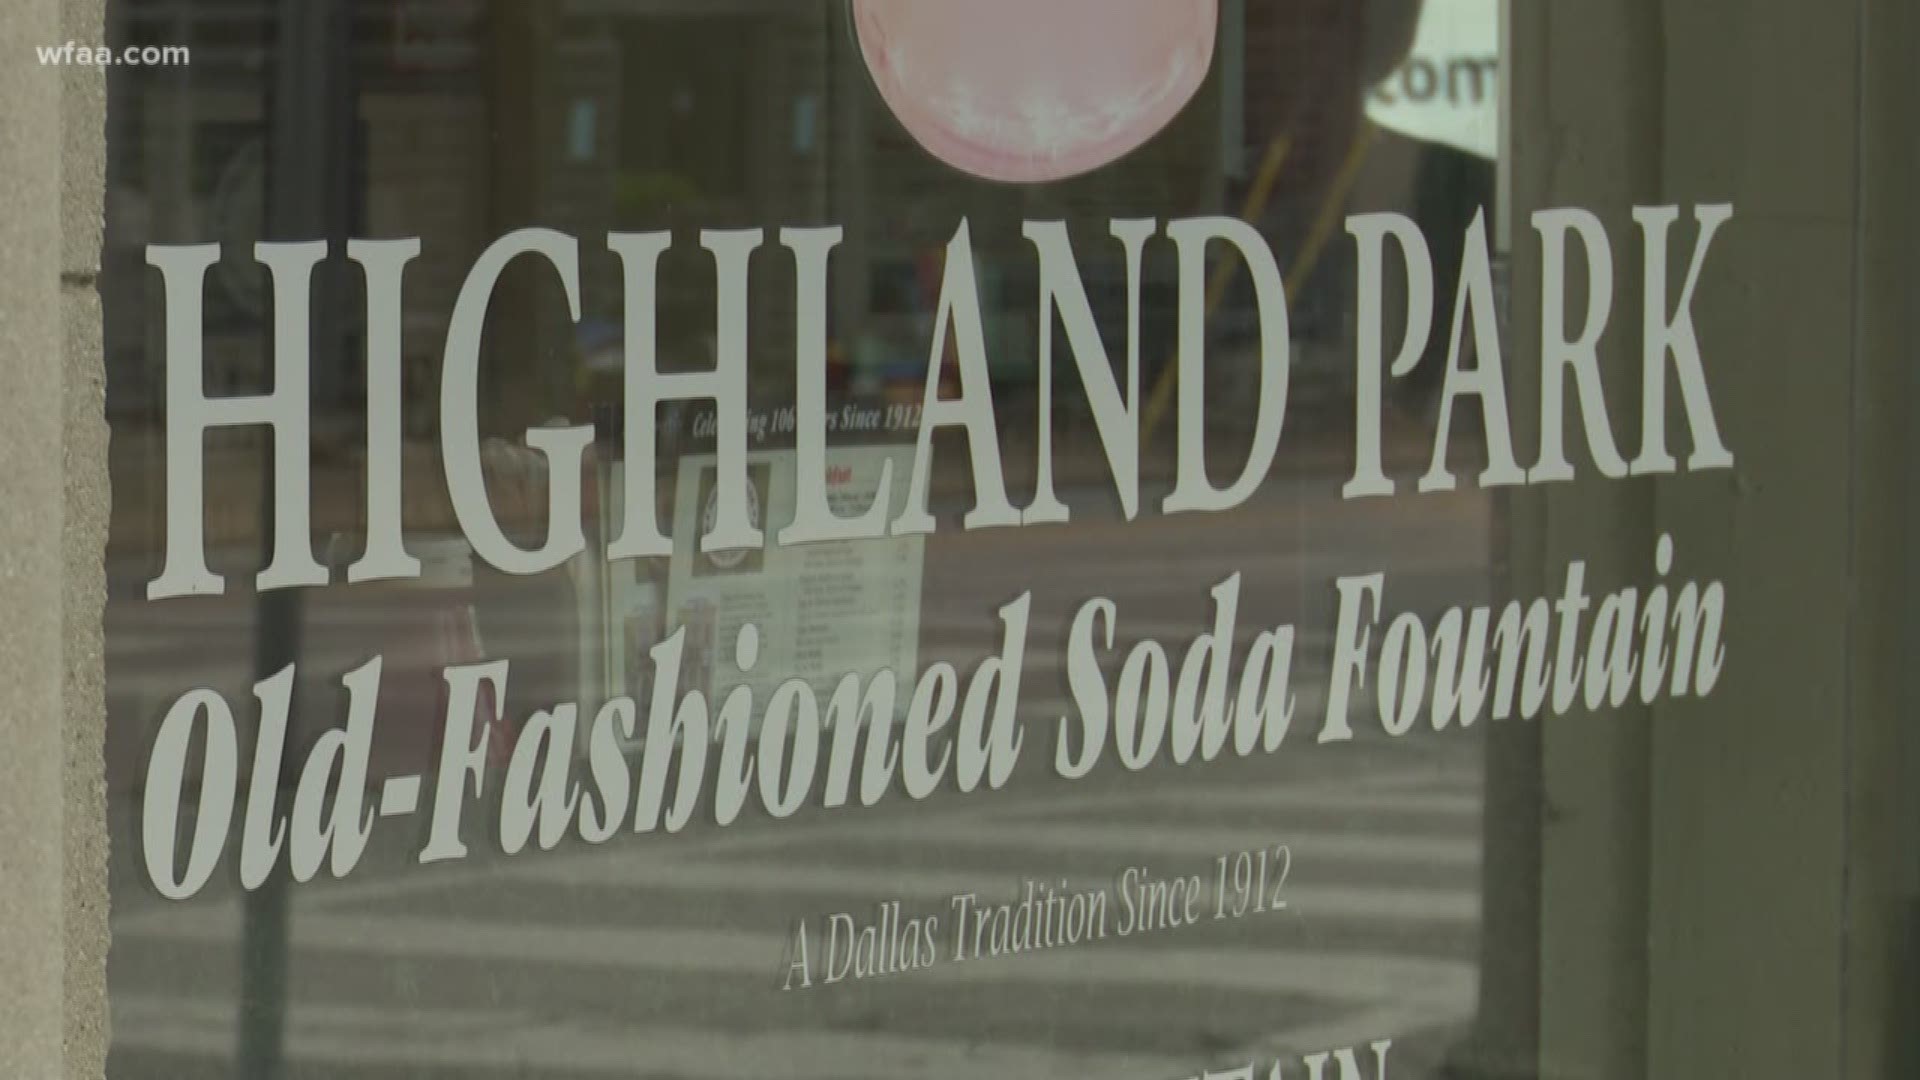 The Highland Park institution opened 106 years ago.